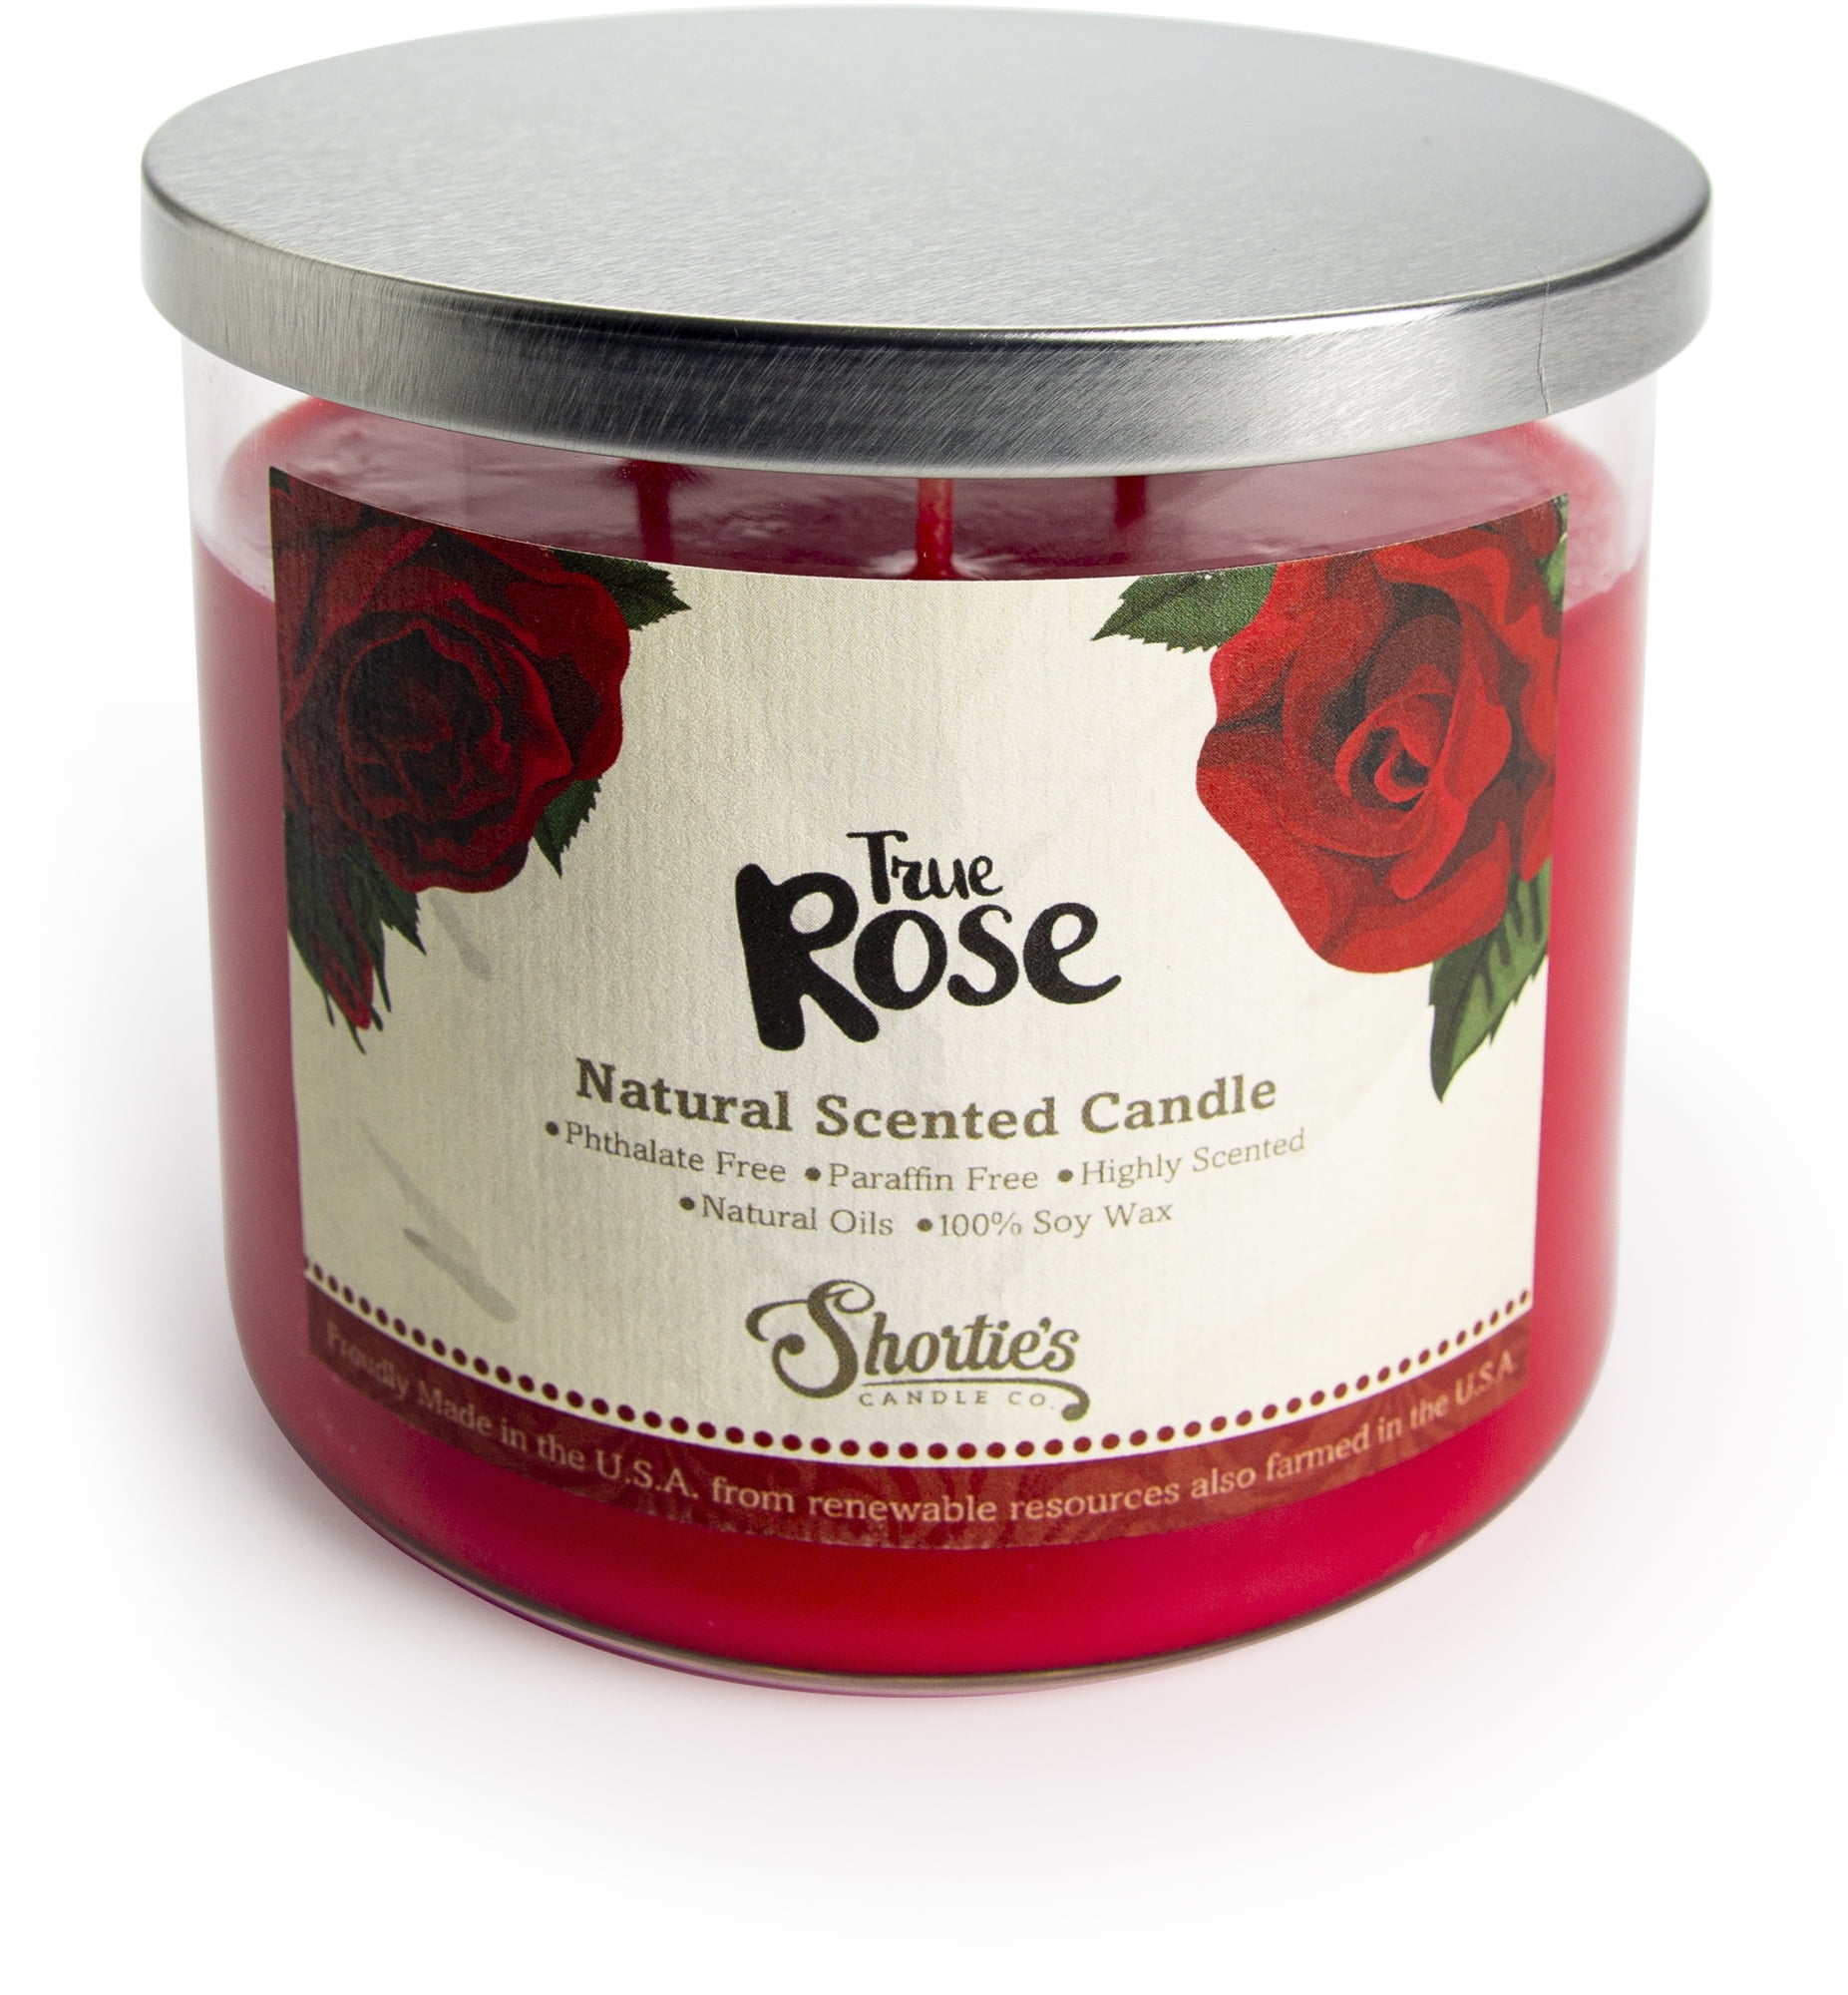 True Rose Soy Wax Melts - All Natural - Made with Responsibly Sourced Soy and Essential Fragrance Oils - Phthalate & Paraffin Free, Vegan, Non-Toxic